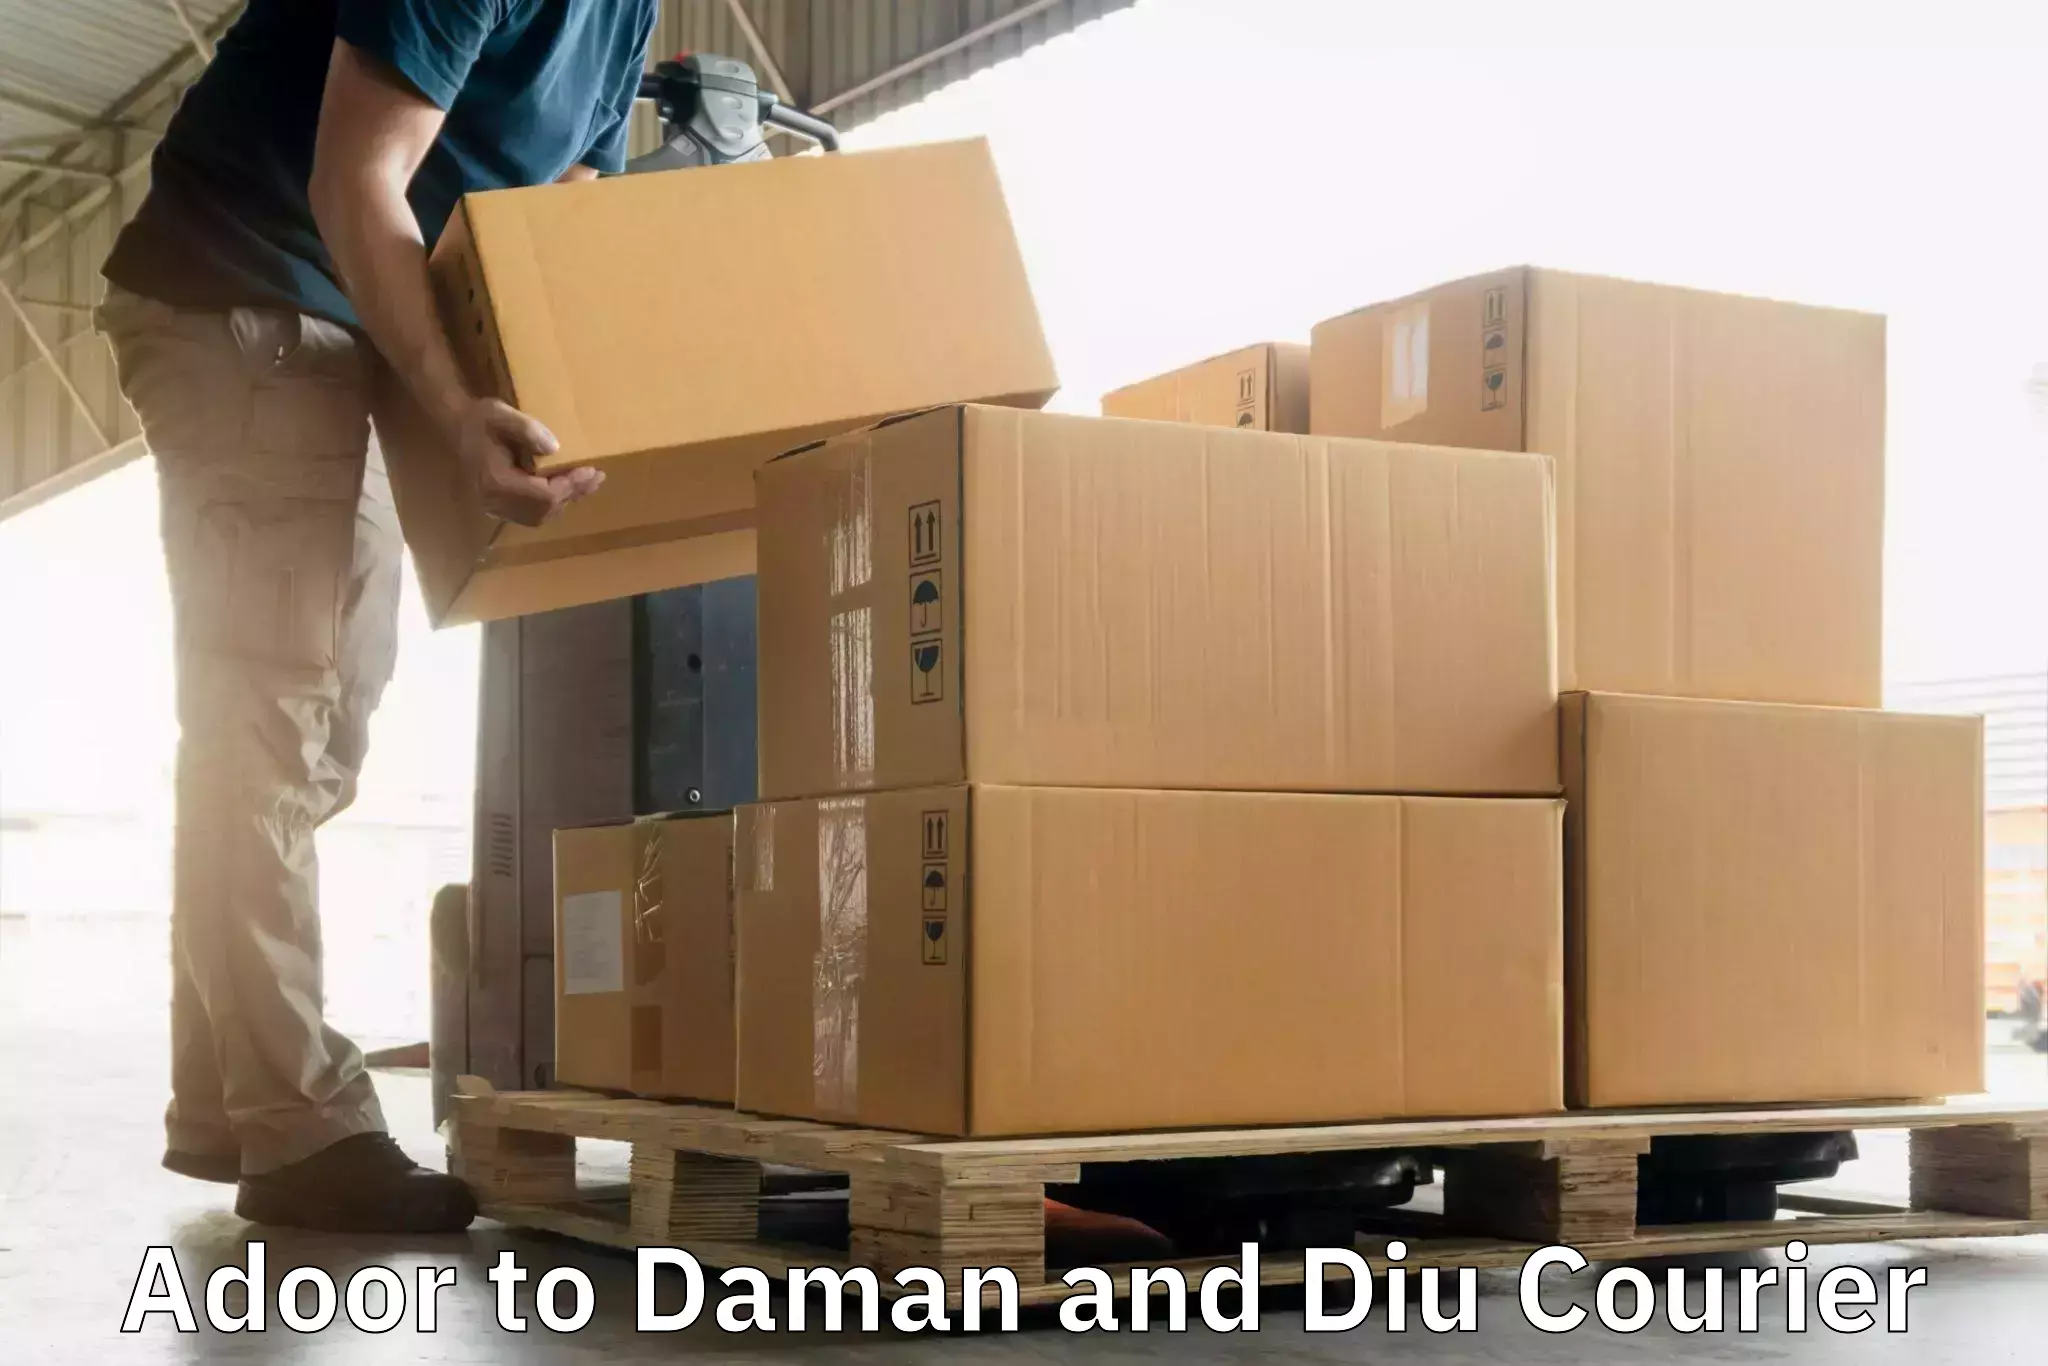 State-of-the-art courier technology Adoor to Diu